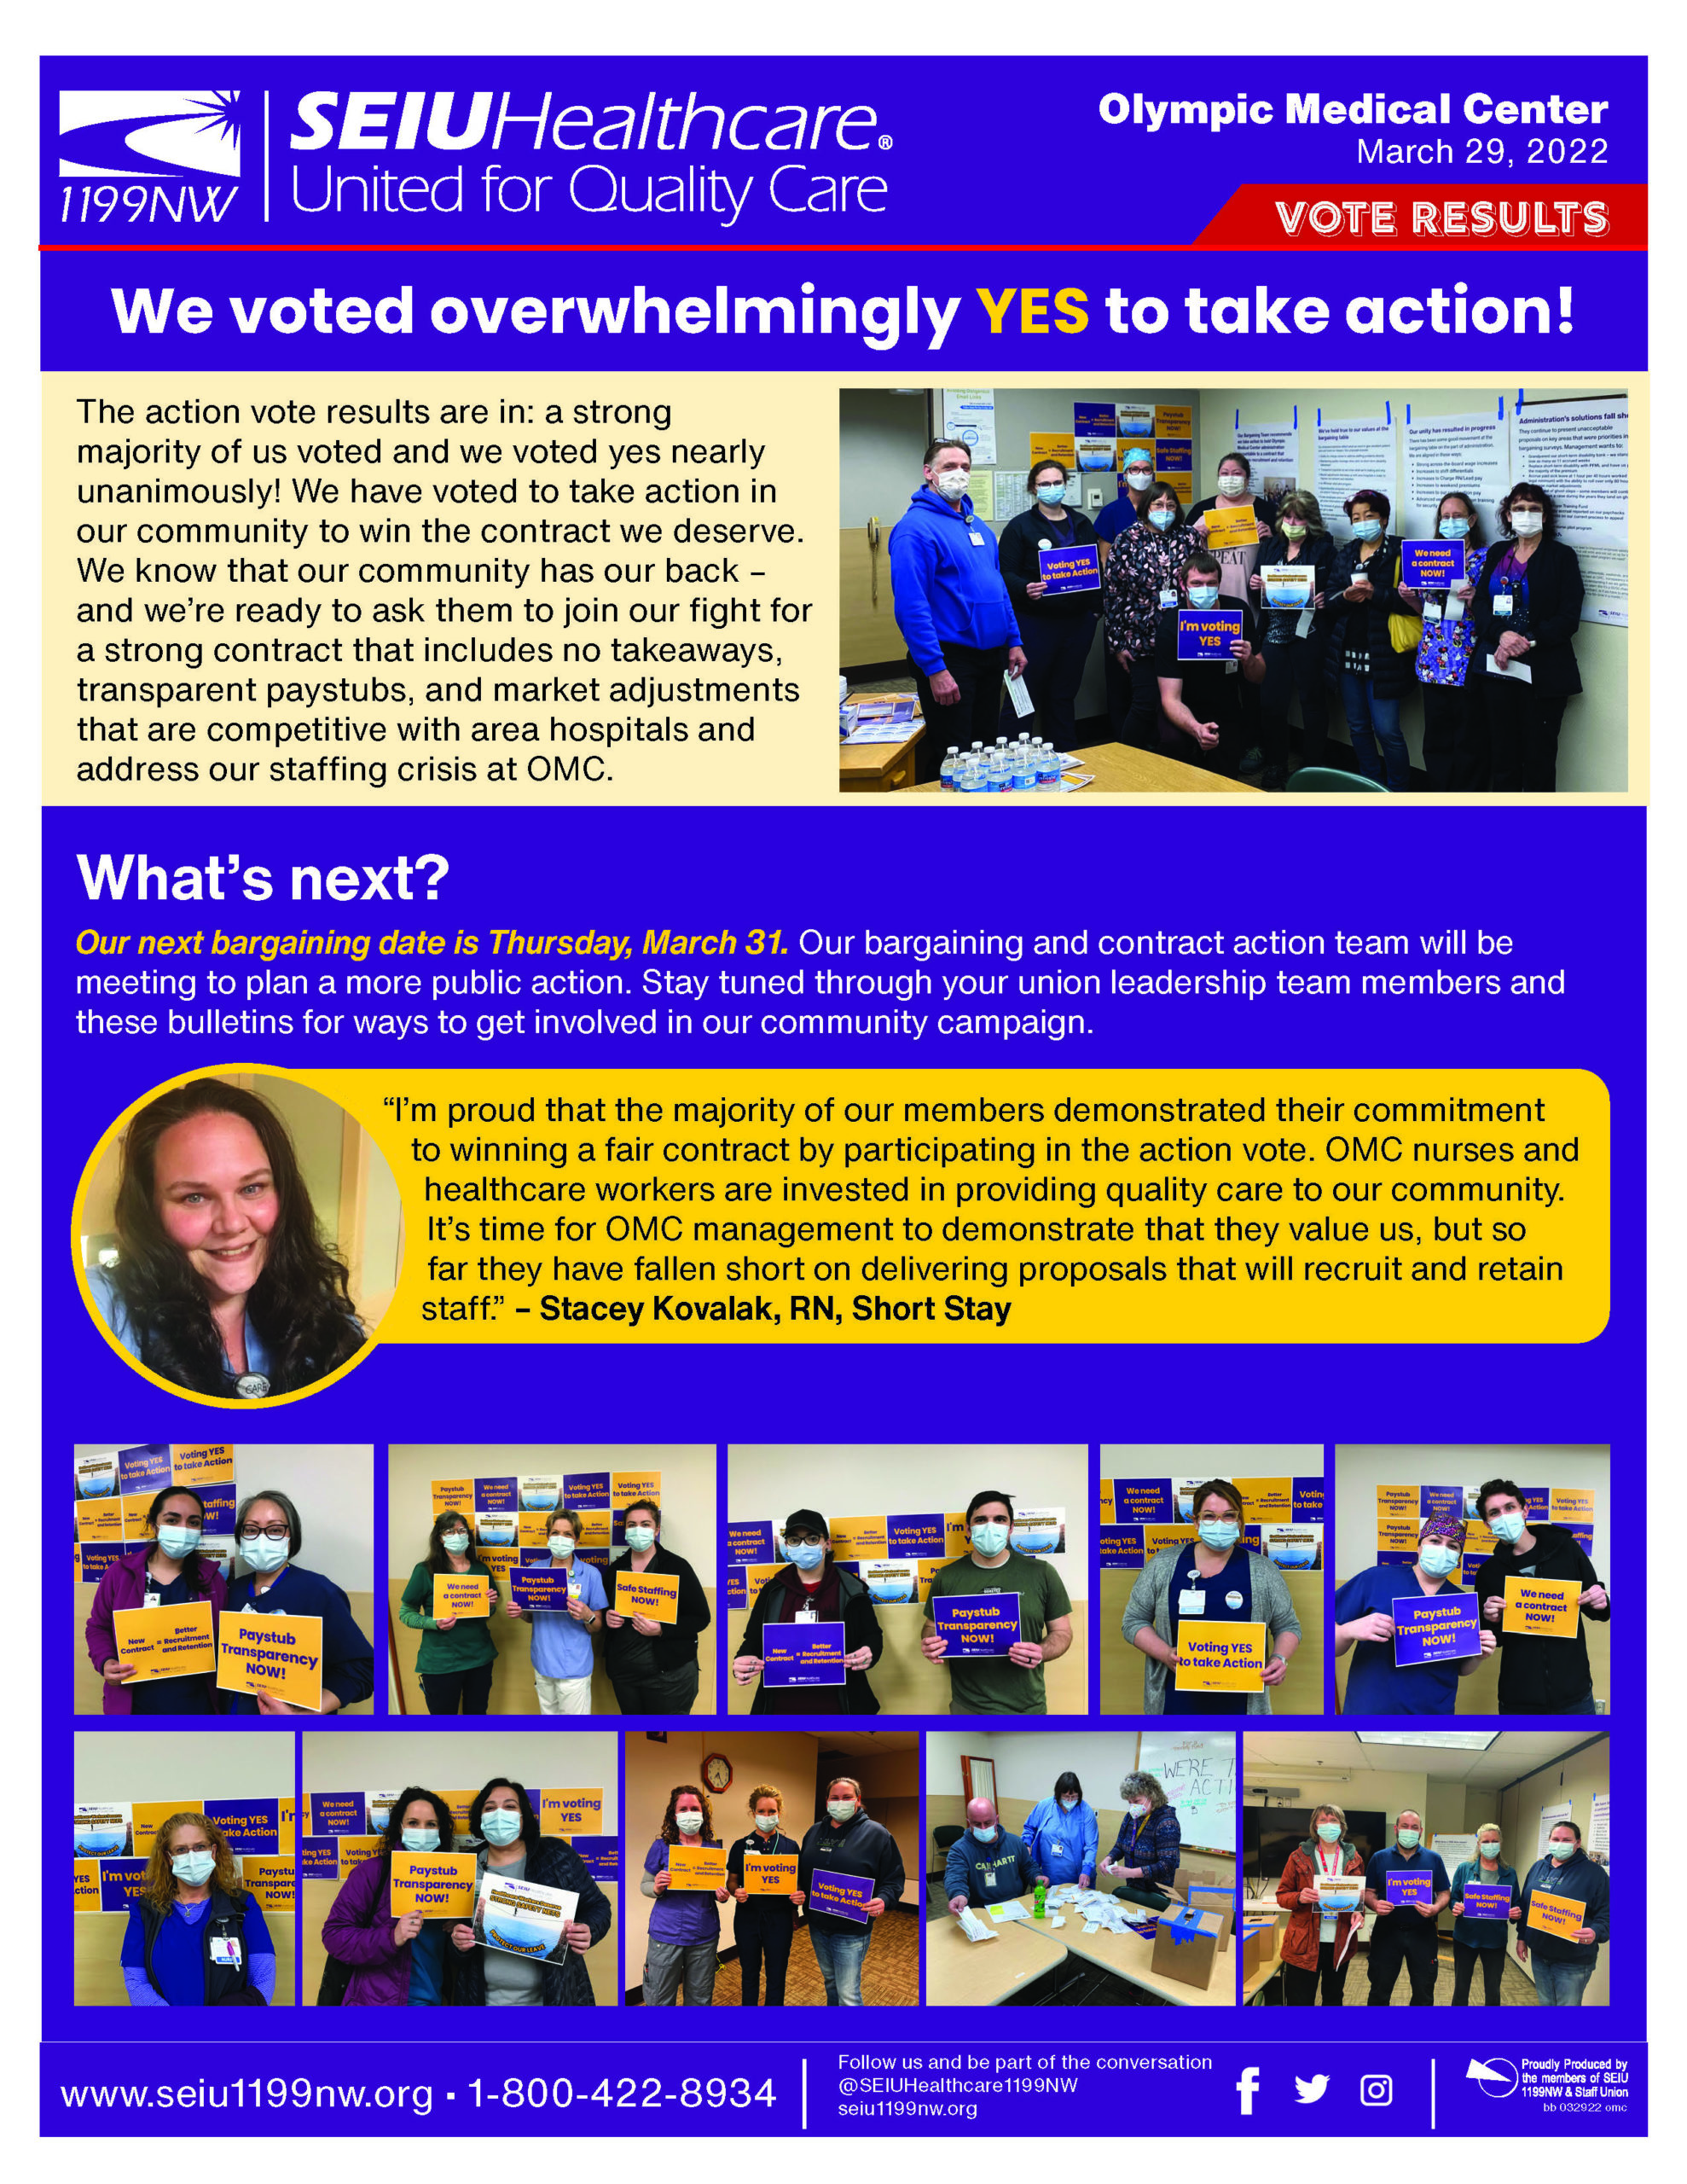 We voted overwhelmingly YES to take action!